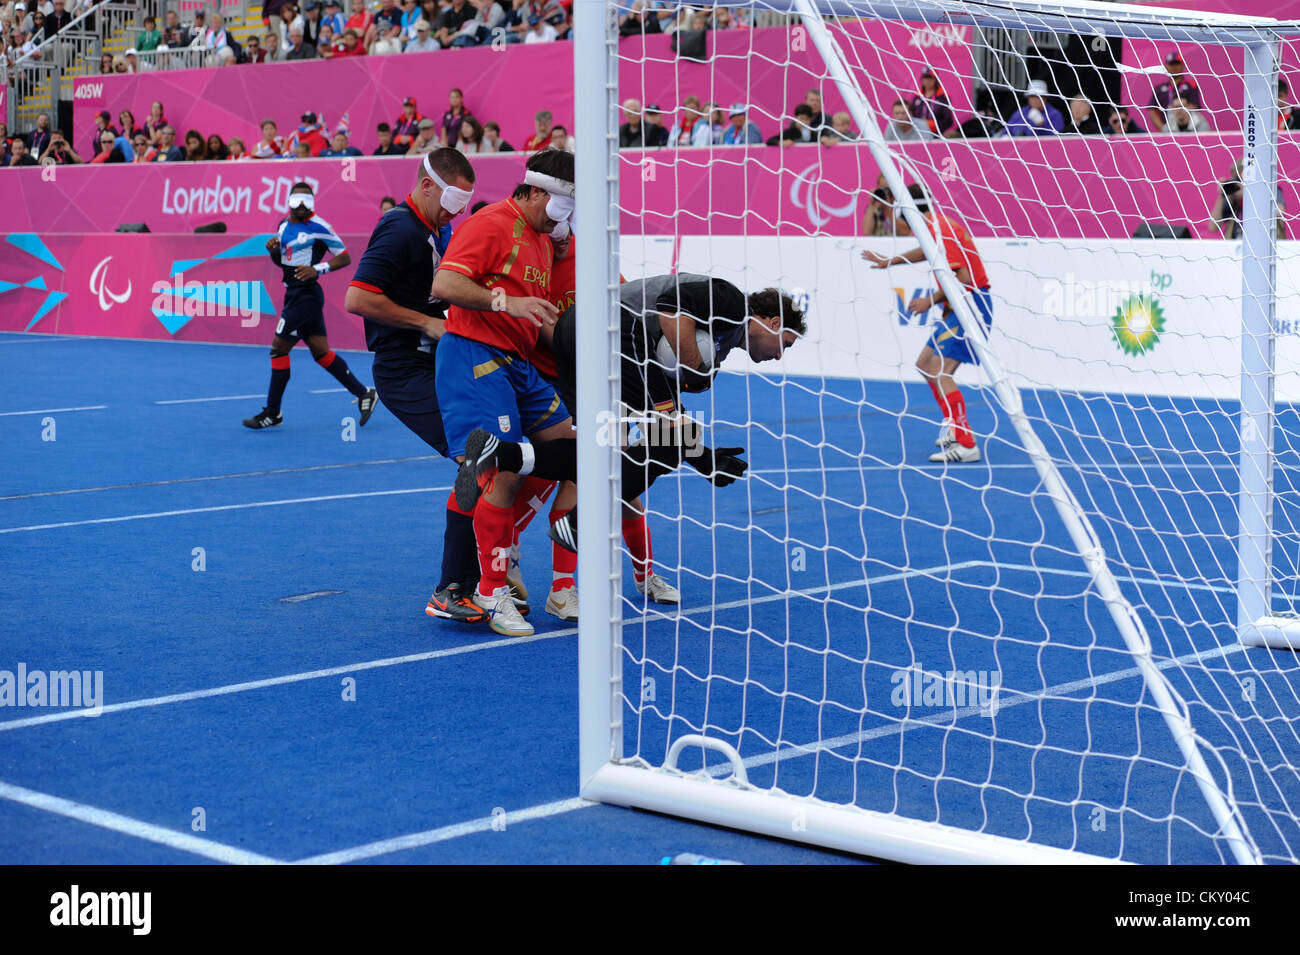 31.08.2012 London, England. Football 5-a-side. Great Britain vs Spain. Alvaro GONZALEZ ALCARAZ (ESP) in action during Day 2 of the Paralympic from the Riverbank Arena. Stock Photo